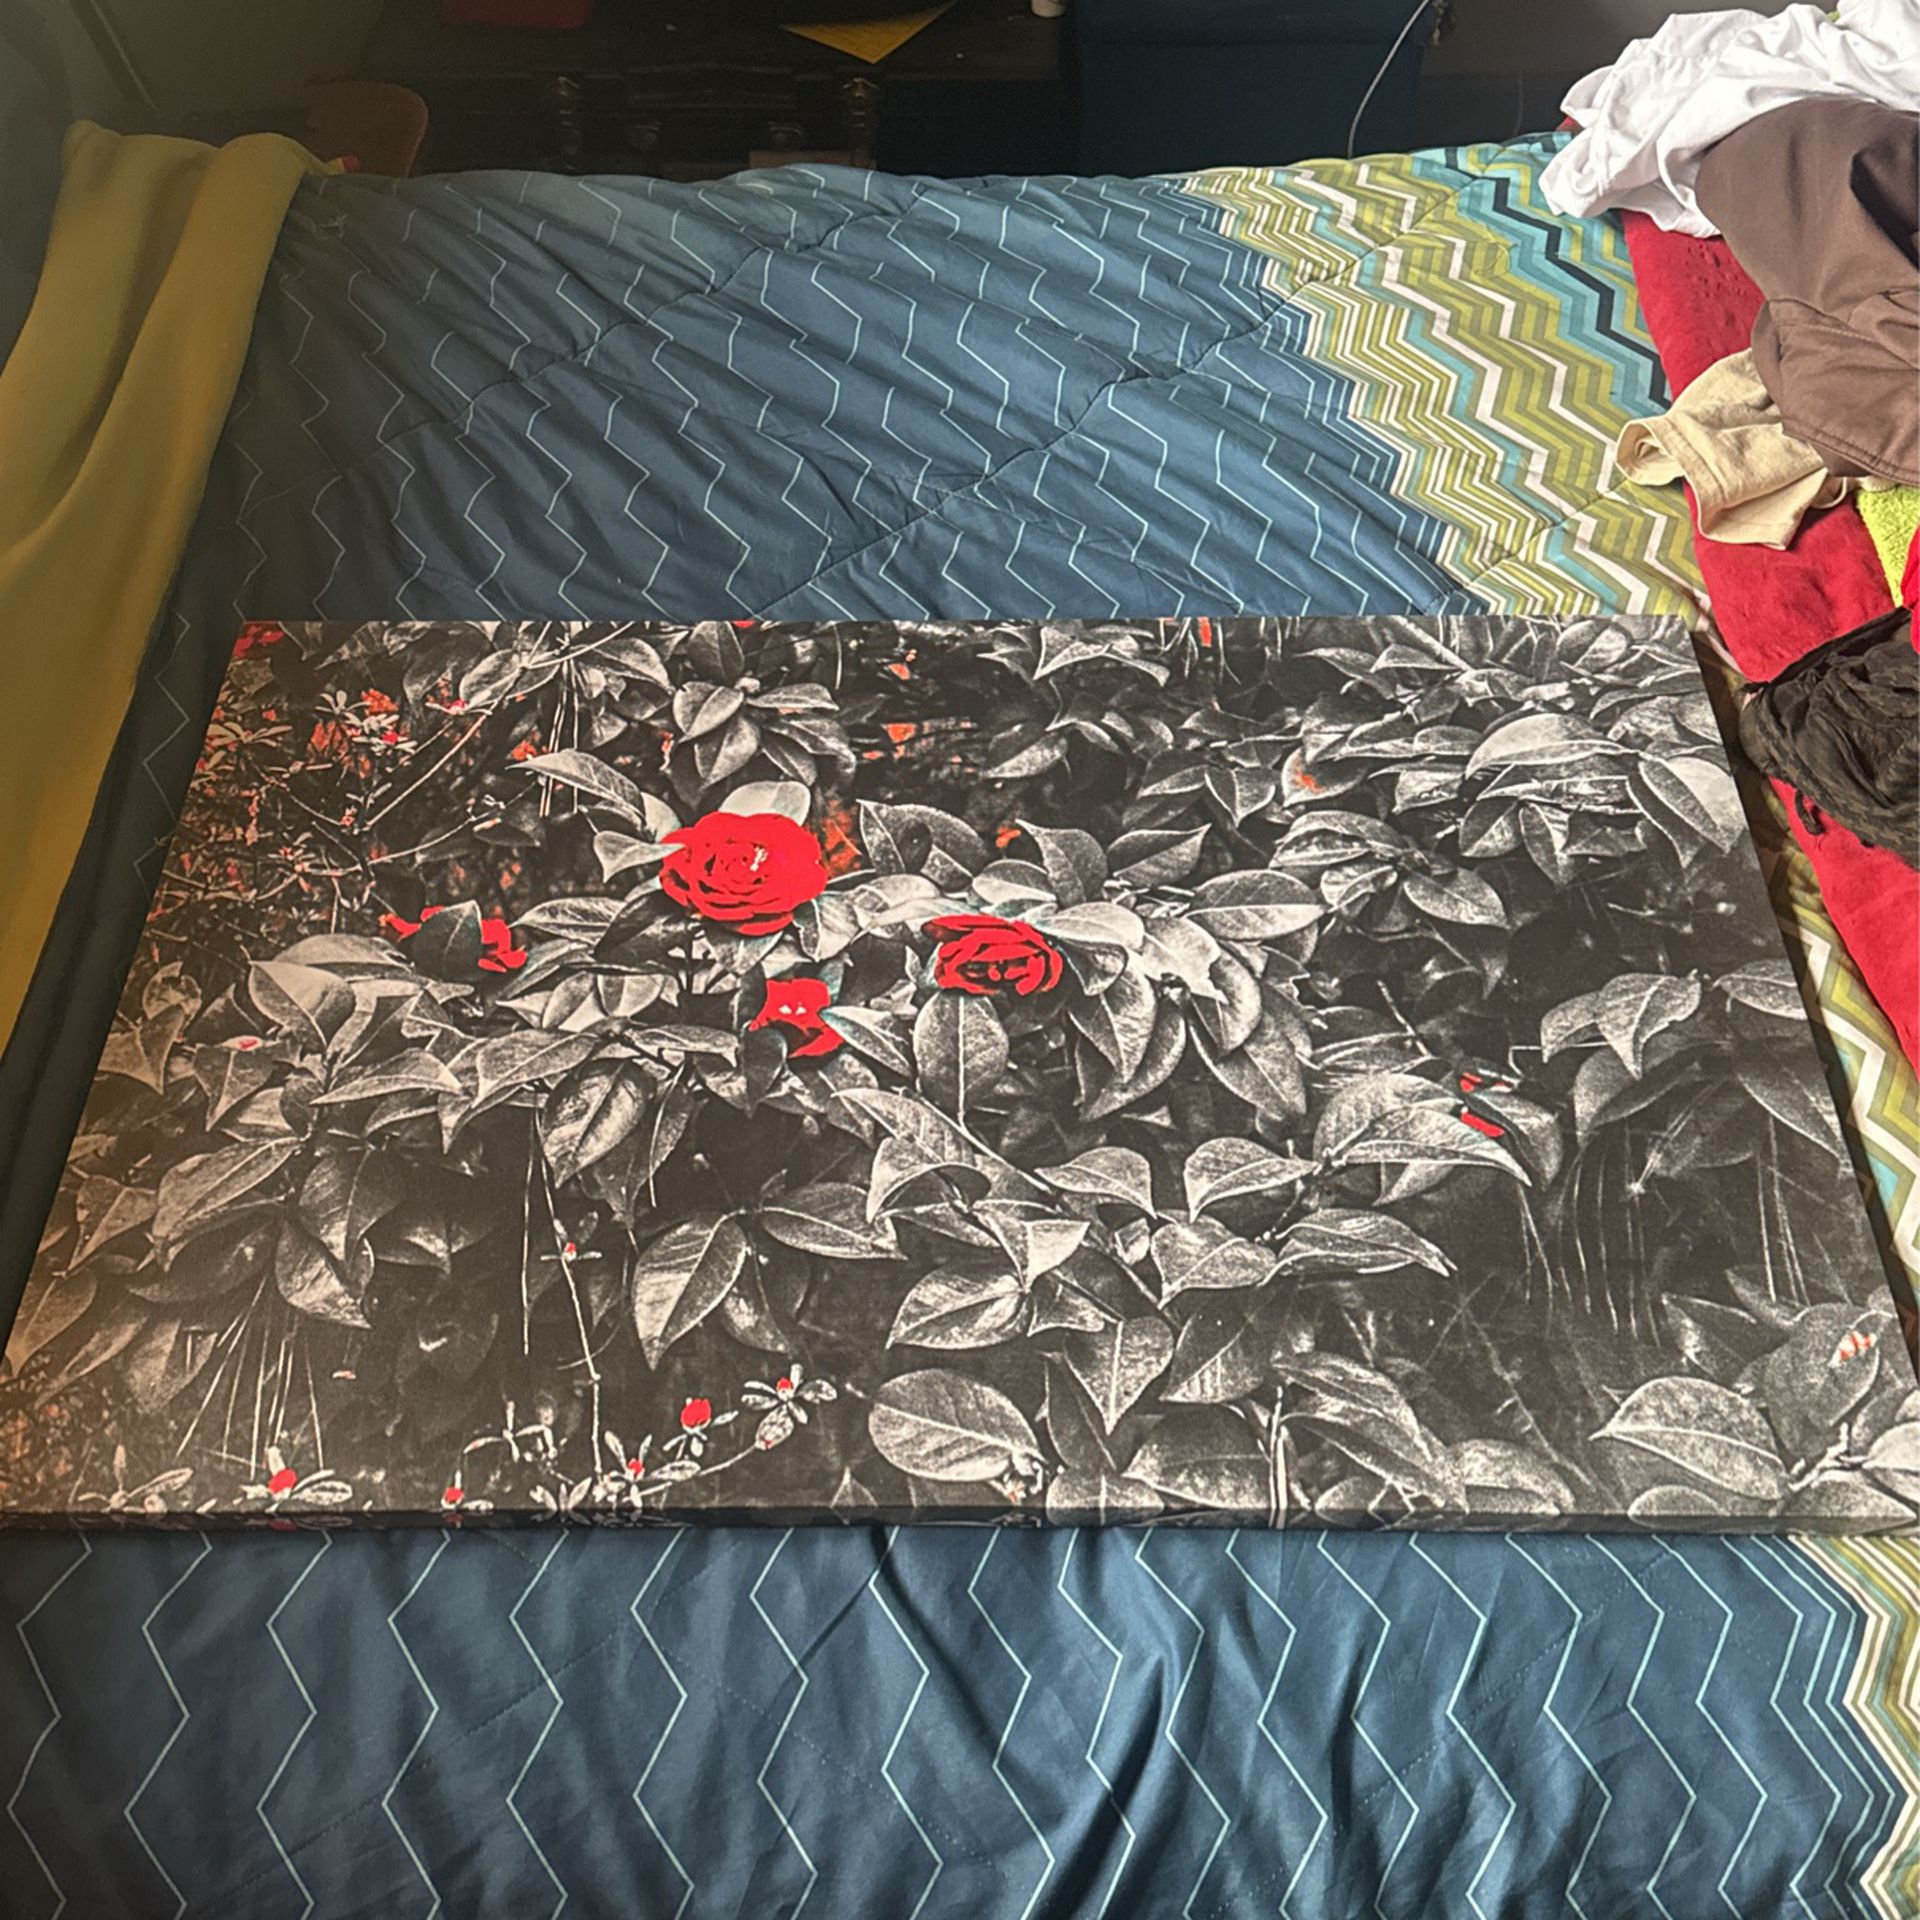 Red Roses On Canvas $100